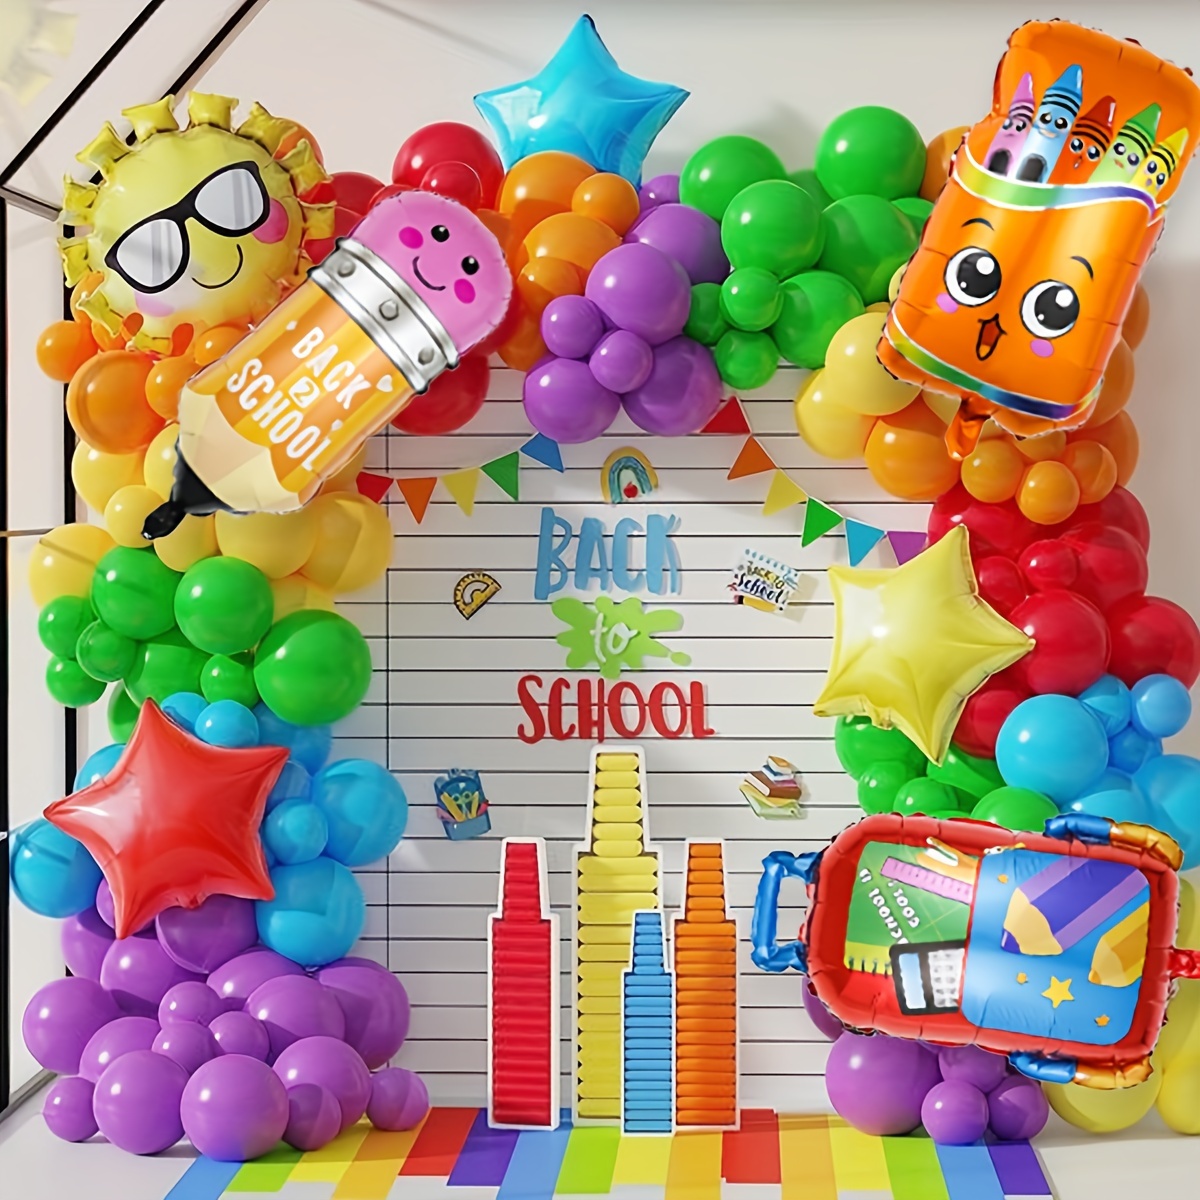 

new Beginnings" 3-piece Back-to-school Balloon Set With Schoolbag, Pencil & Crayon Box - Includes Straw Ribbon For First Day Decorations, Kindergarten & Teacher Welcome Party Supplies